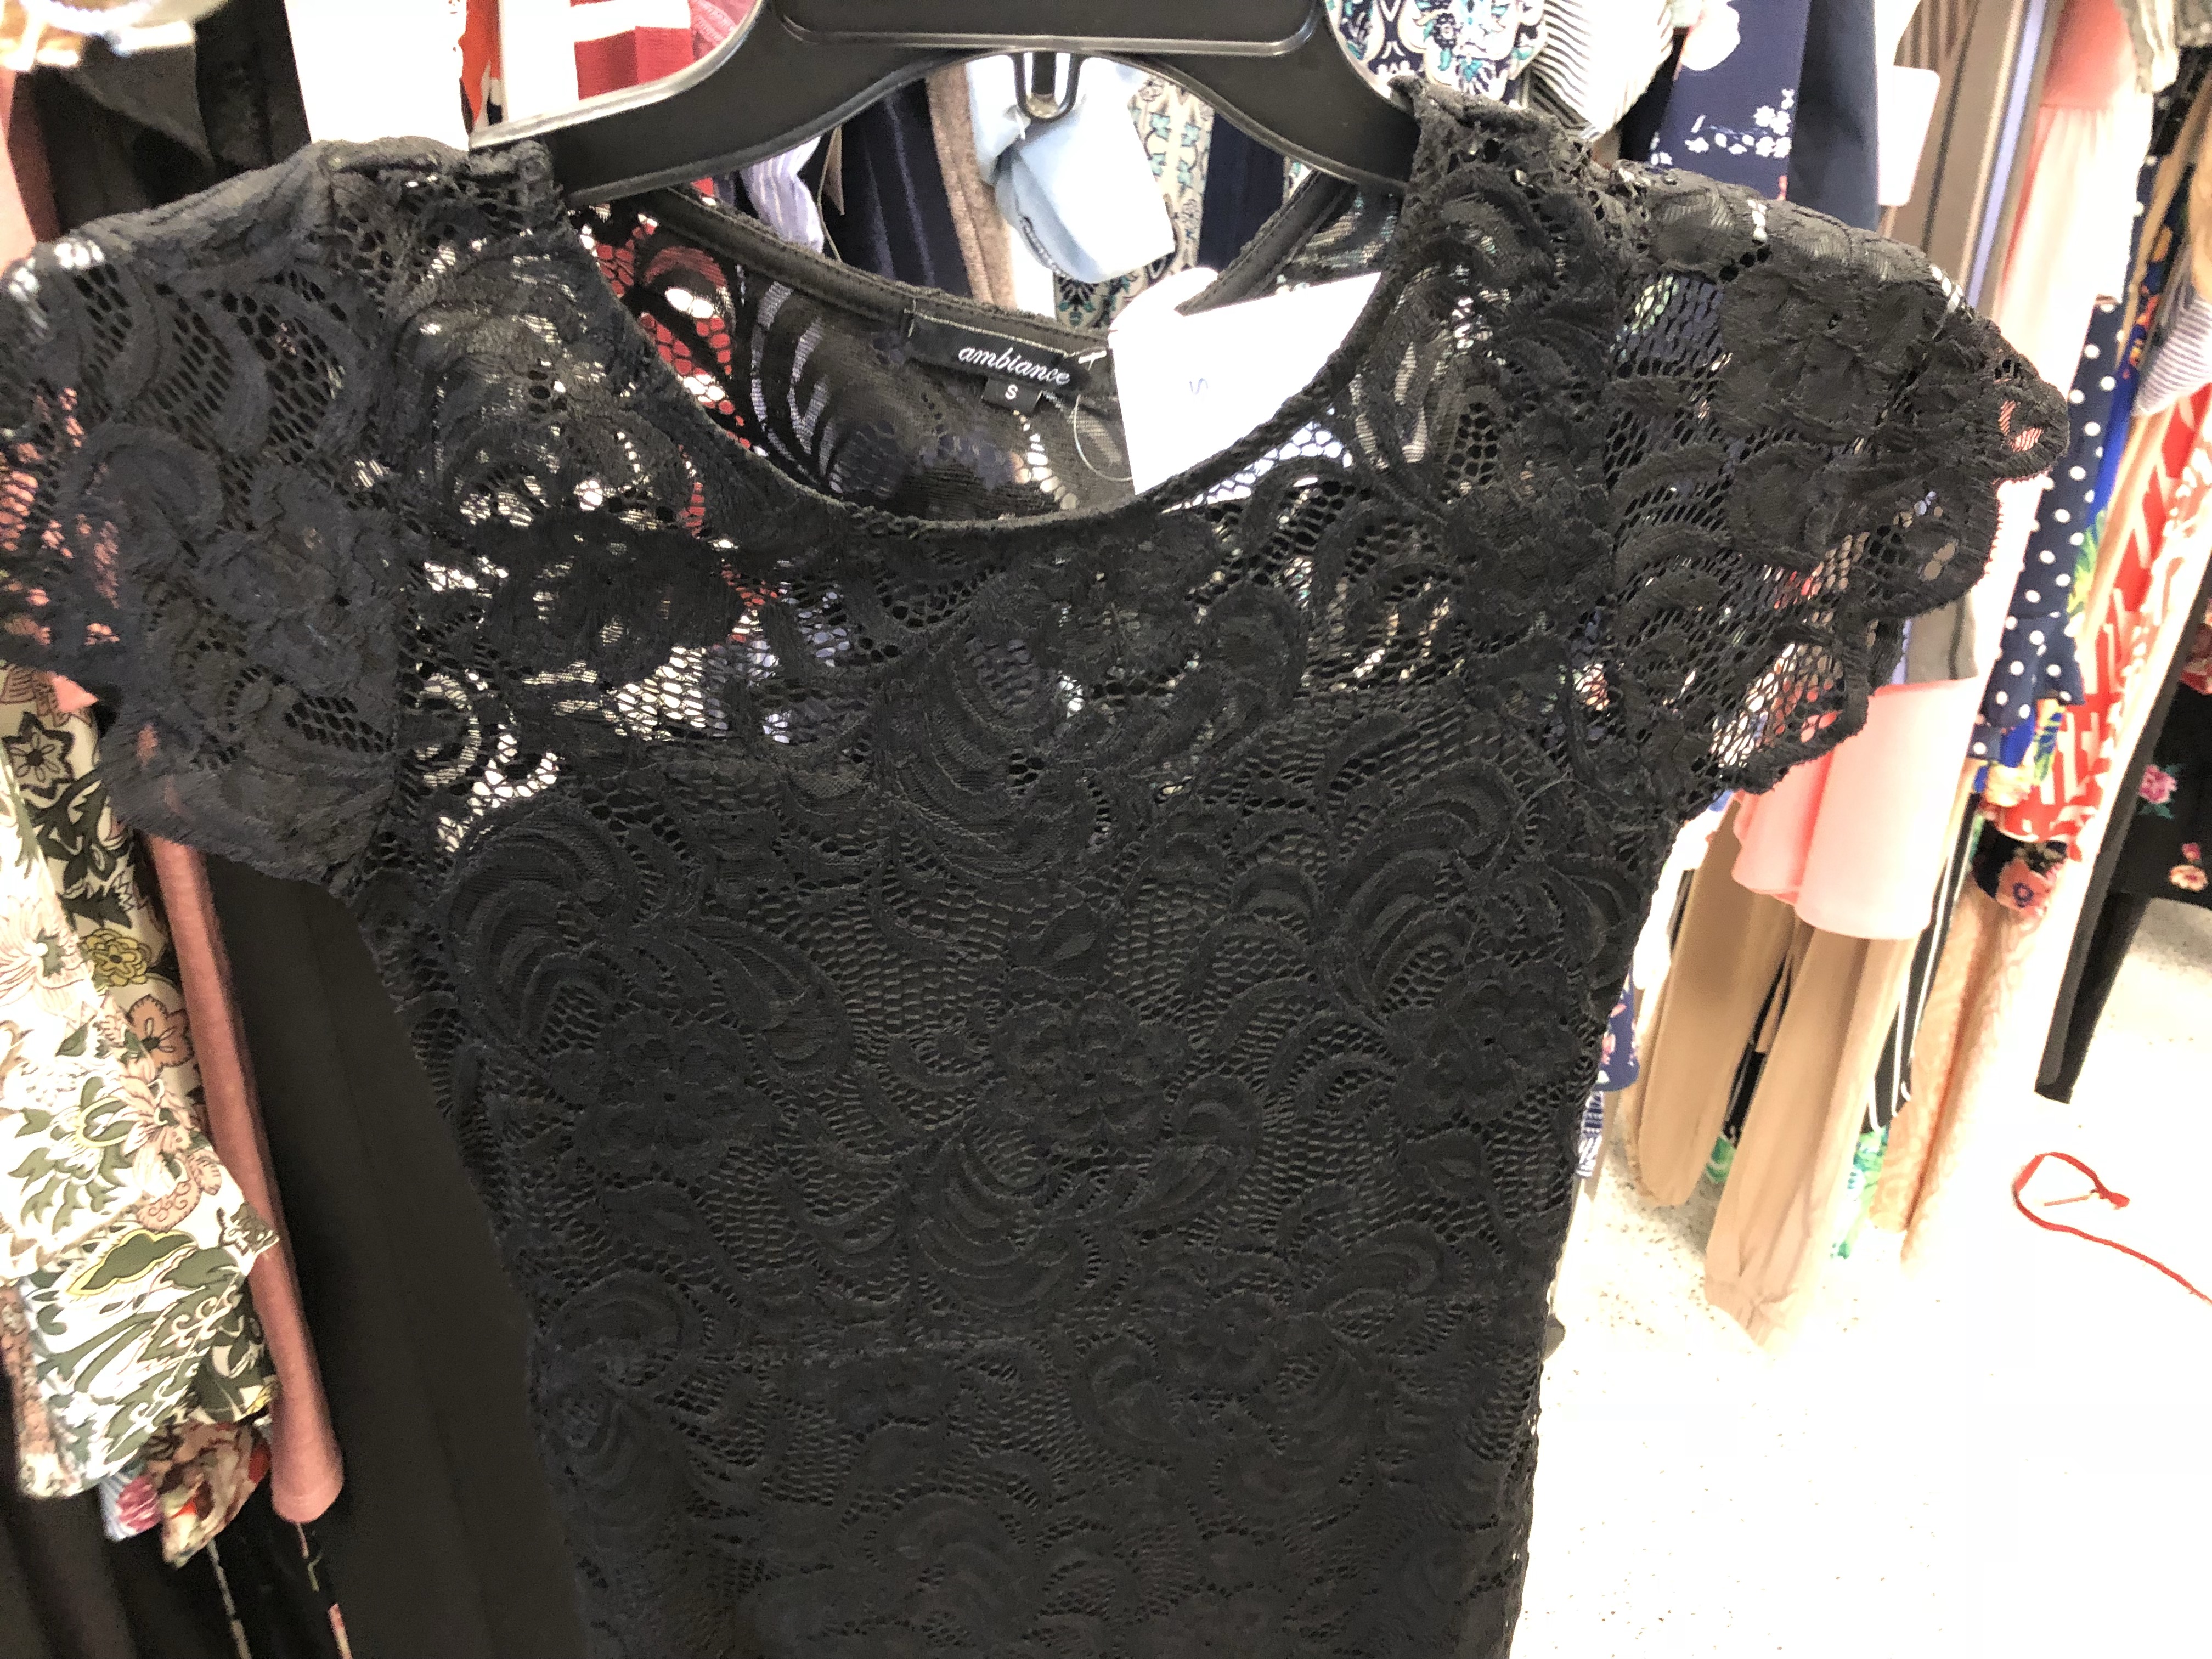 dresses at ross store